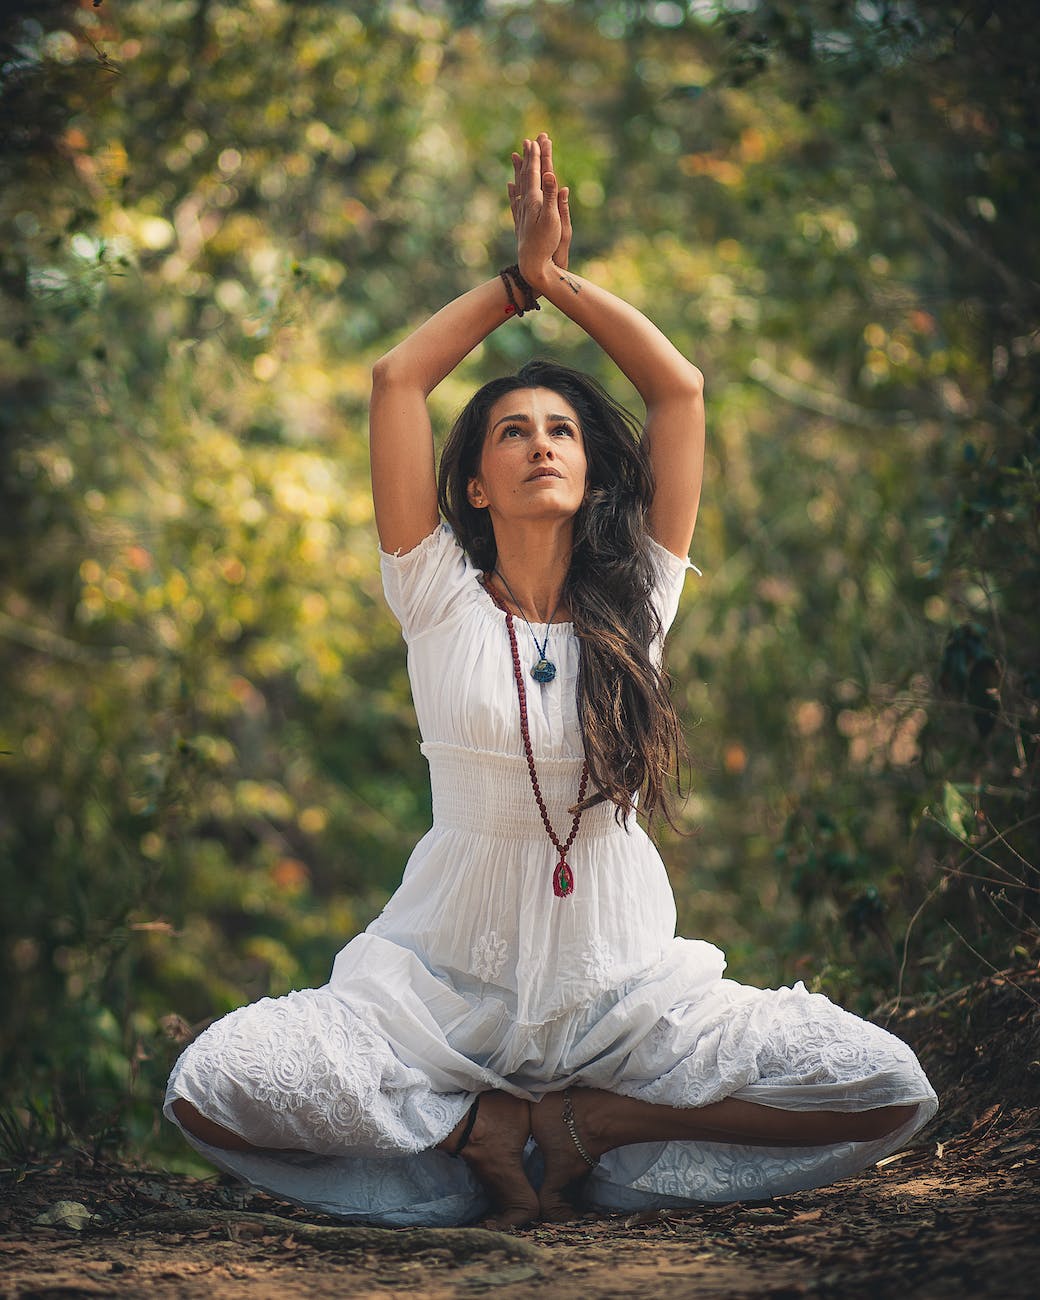 Find Your Way to Inner Peace and Self-Discovery with Yoga